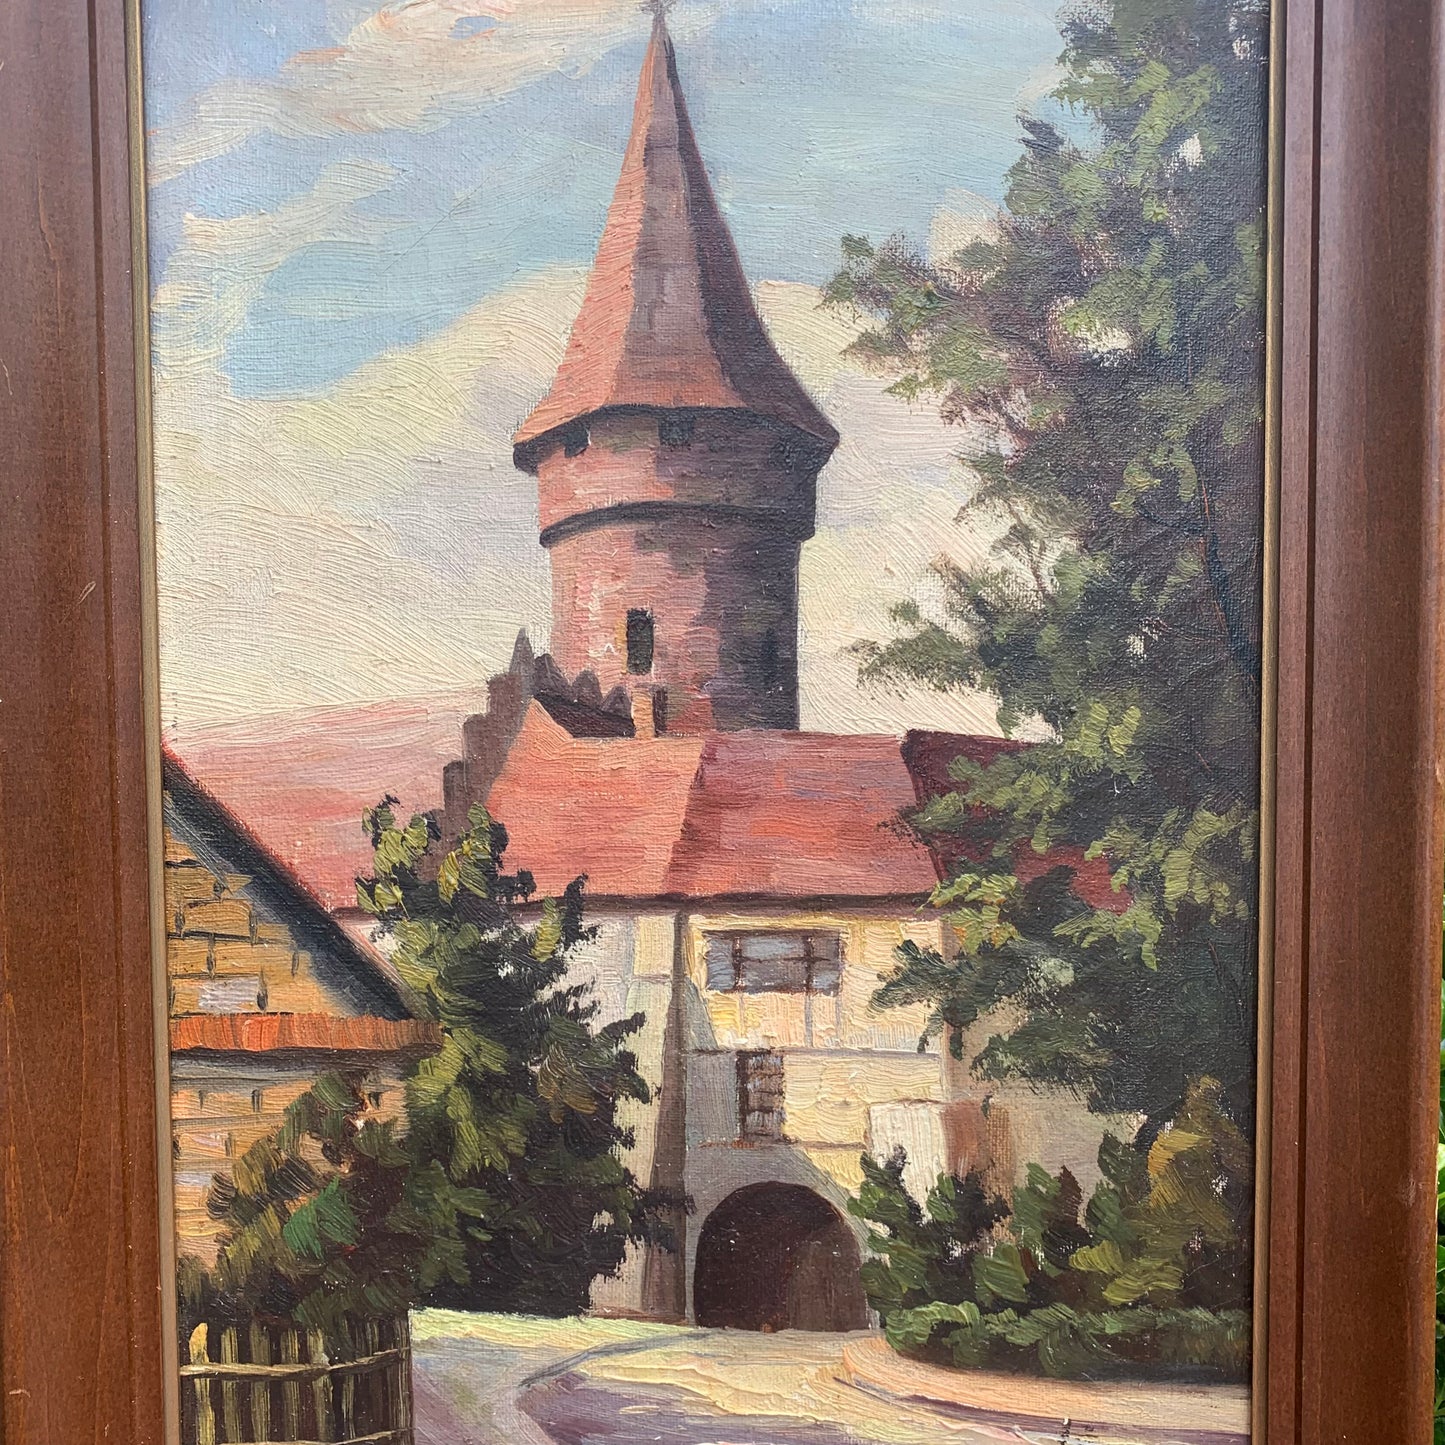 Antique Framed Canvas Oil Painting of A Medieval Castle